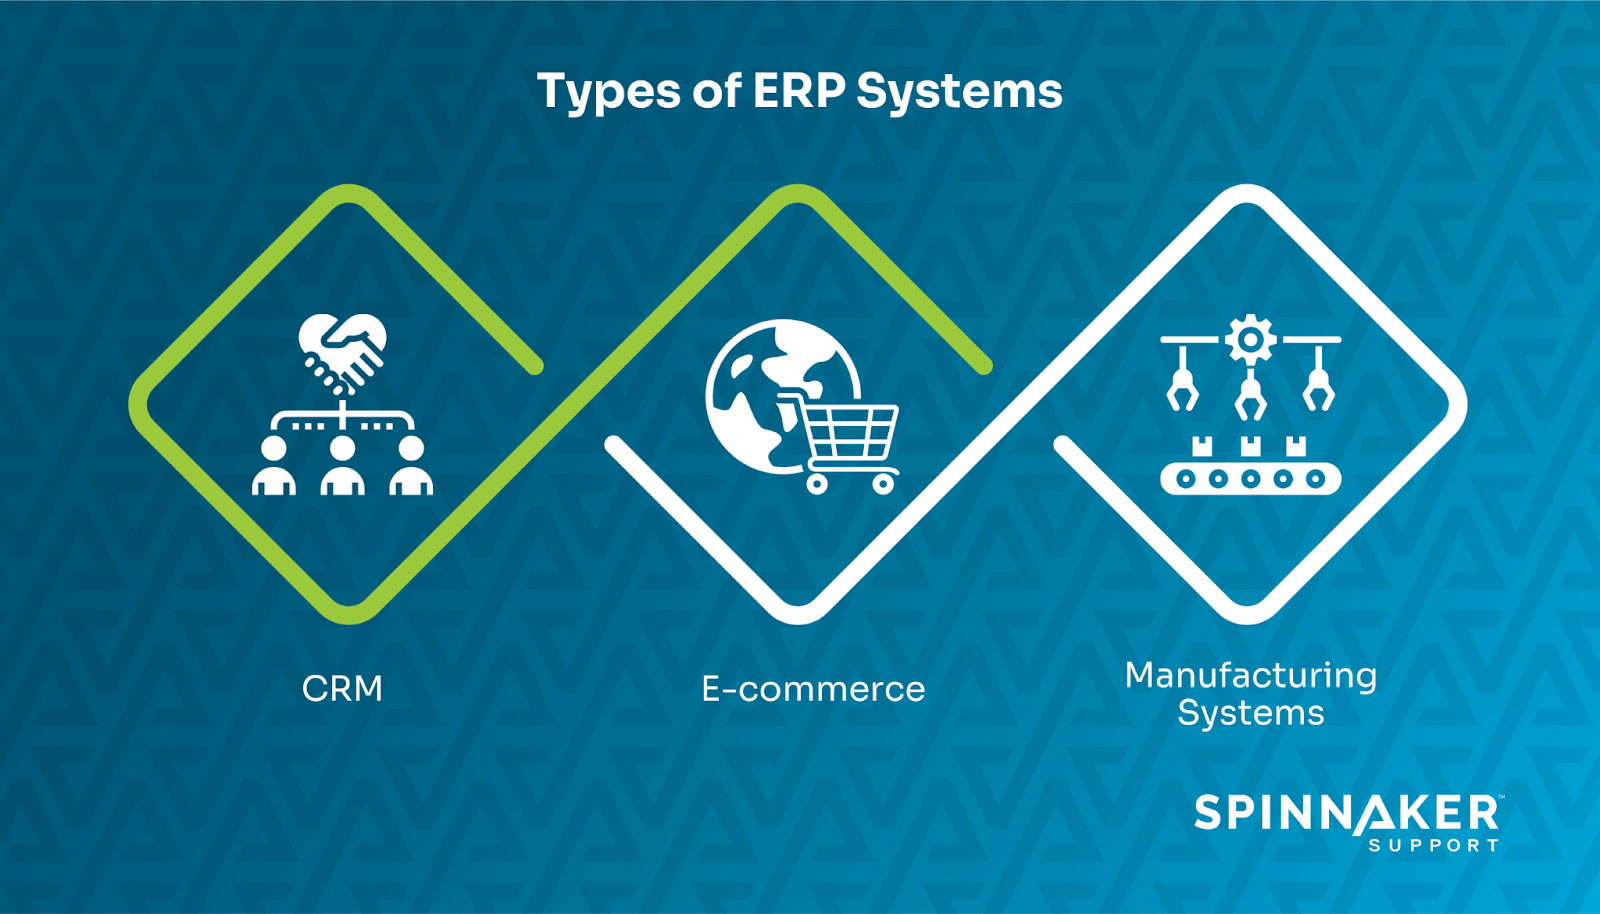 types of systems that can integrate with ERP.